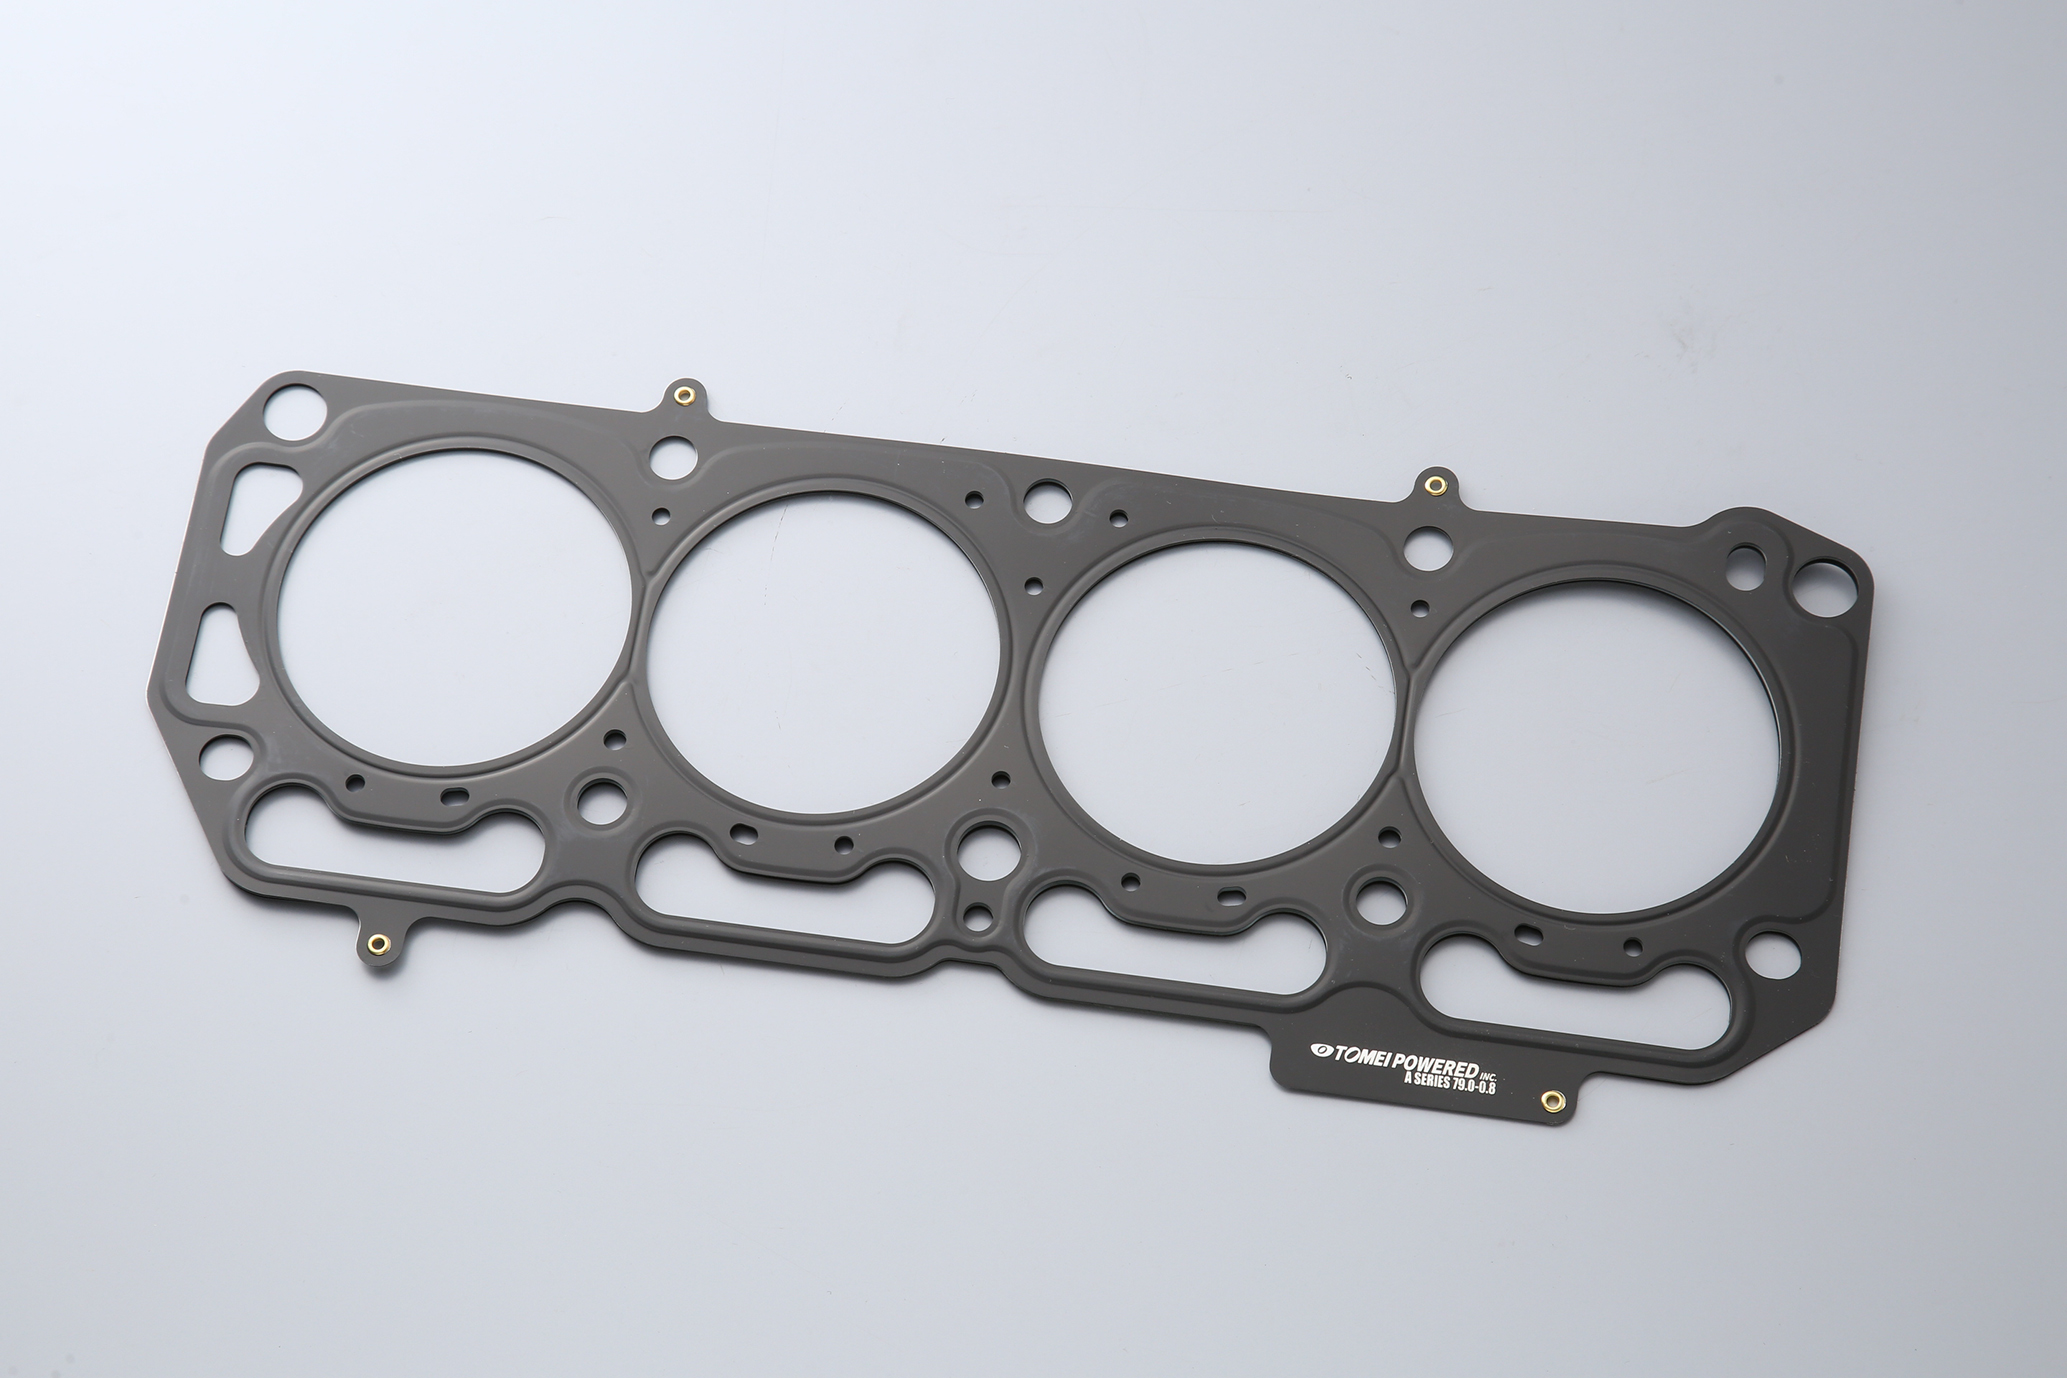 HEAD GASKET for A12/A14/A15 － TOMEI POWERED INC. ONLINE CATALOGUE